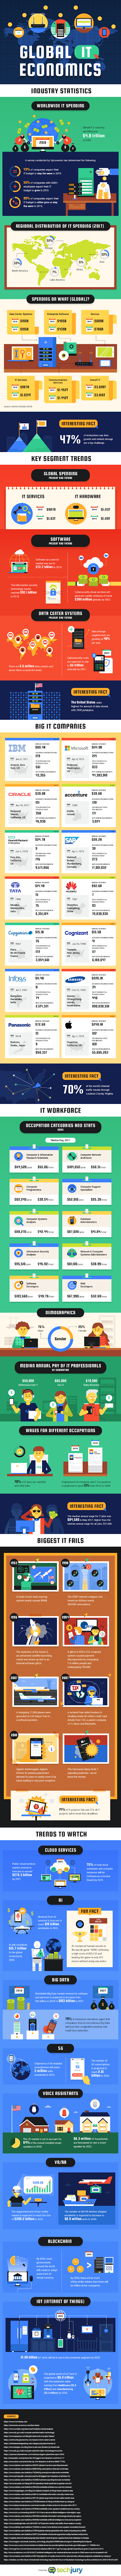 Amazing Facts and Figures About the Global IT Industry Infographic